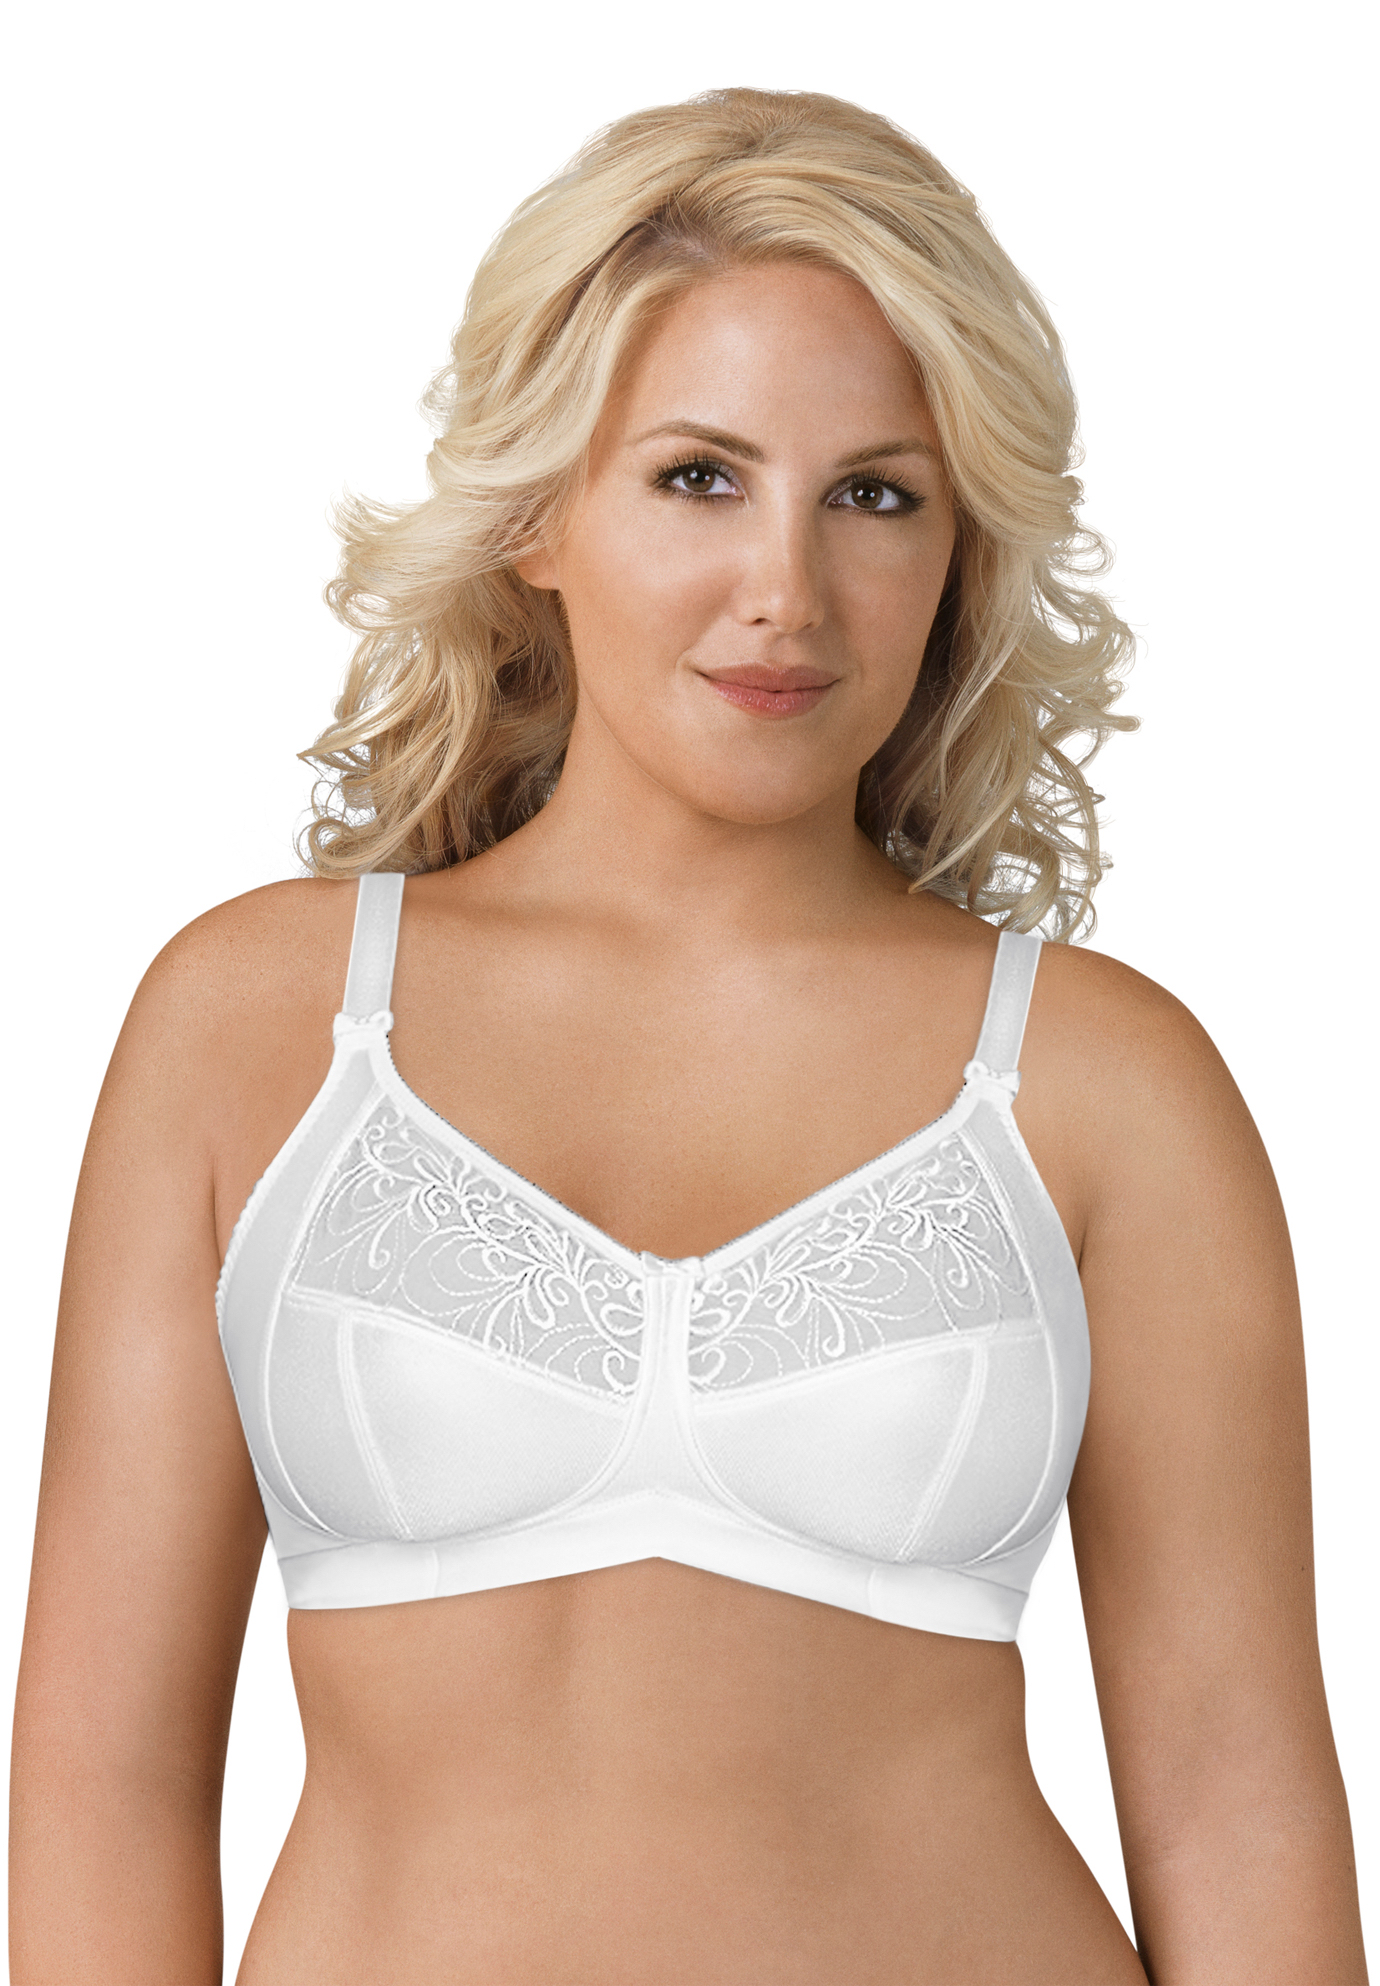 Fully Soft Cup Embroidered Mesh Bra, 